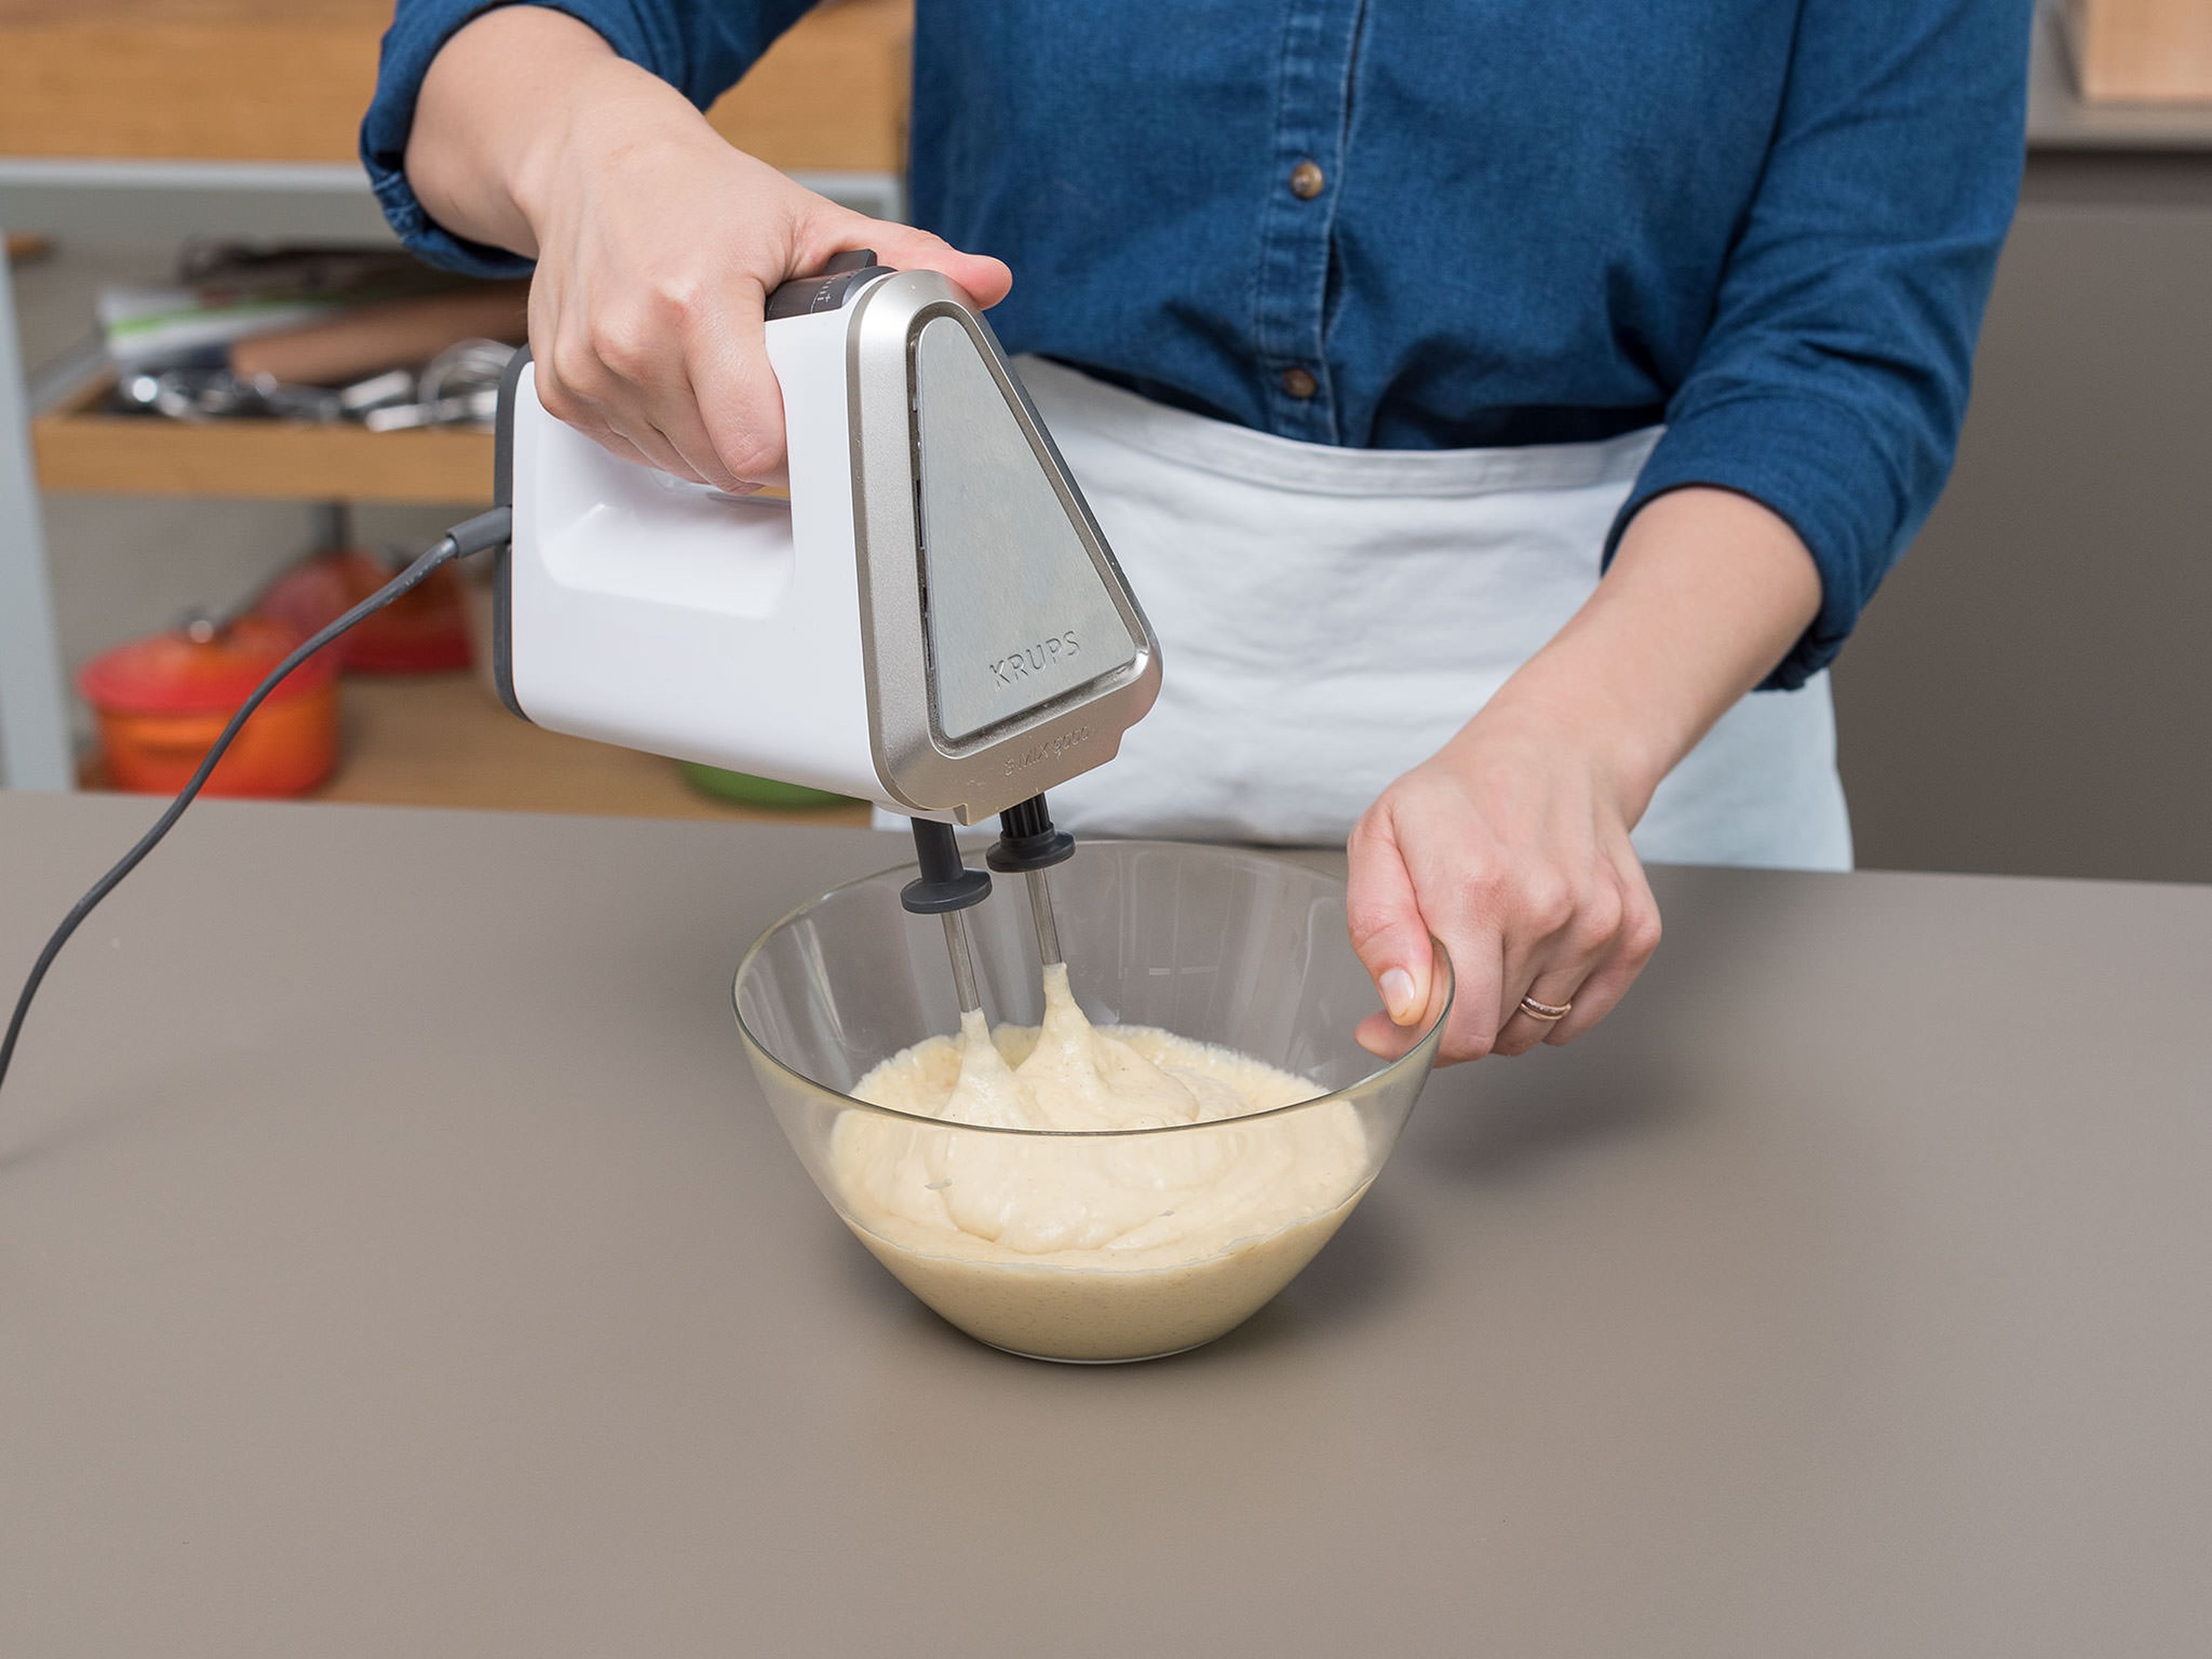 Preheat oven to 180°C/350°F. Mix flour, sugar, baking powder, and half of the vanilla sugar in a bowl with the hand mixer. Cube the butter and add it to the bowl with the egg and mix to combine.